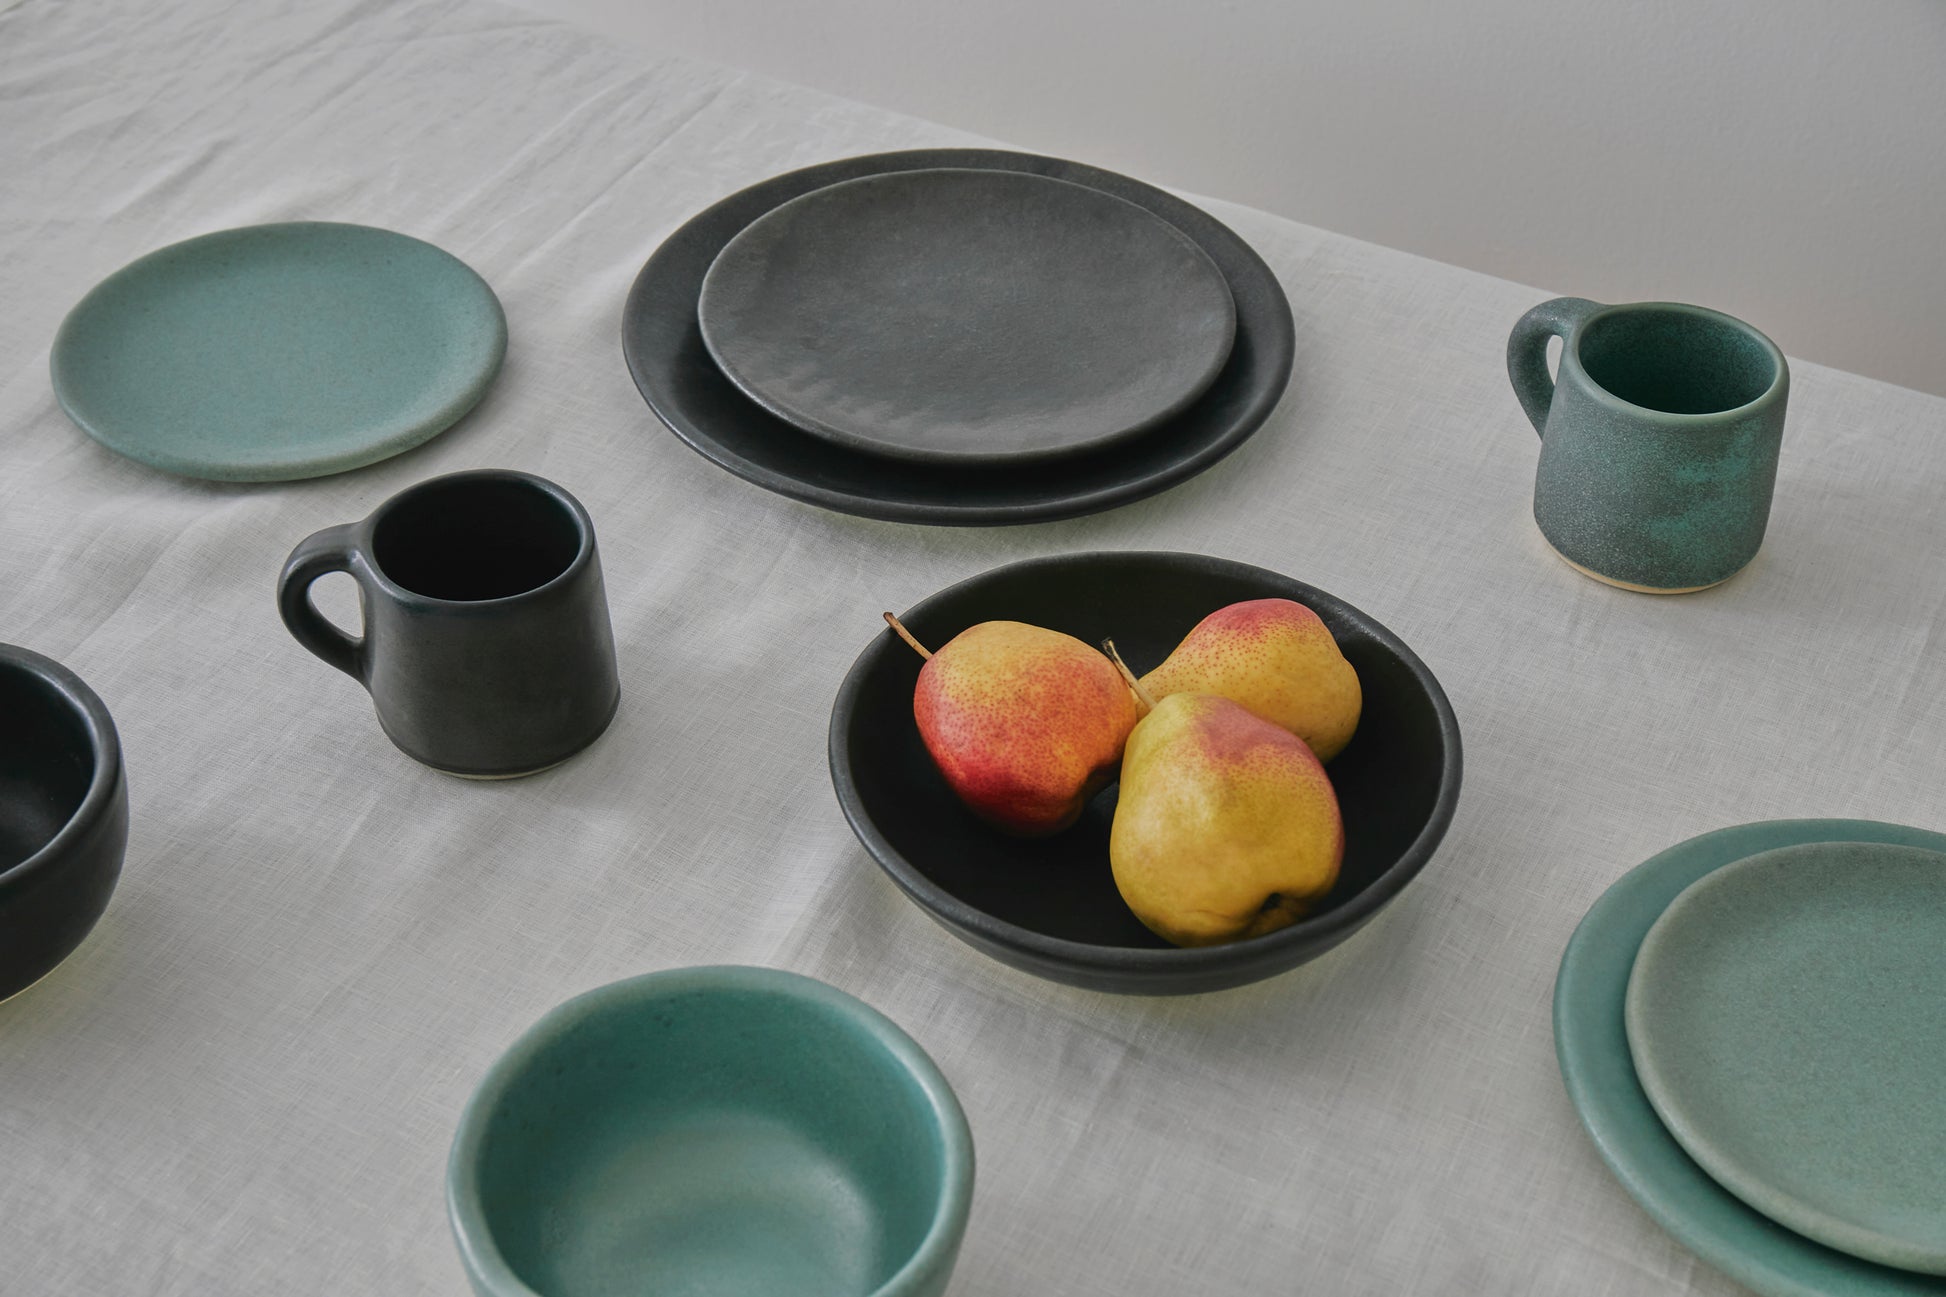 Table set with black and sage-colored dishes, centering a shallow bowl of orange and yellow pears